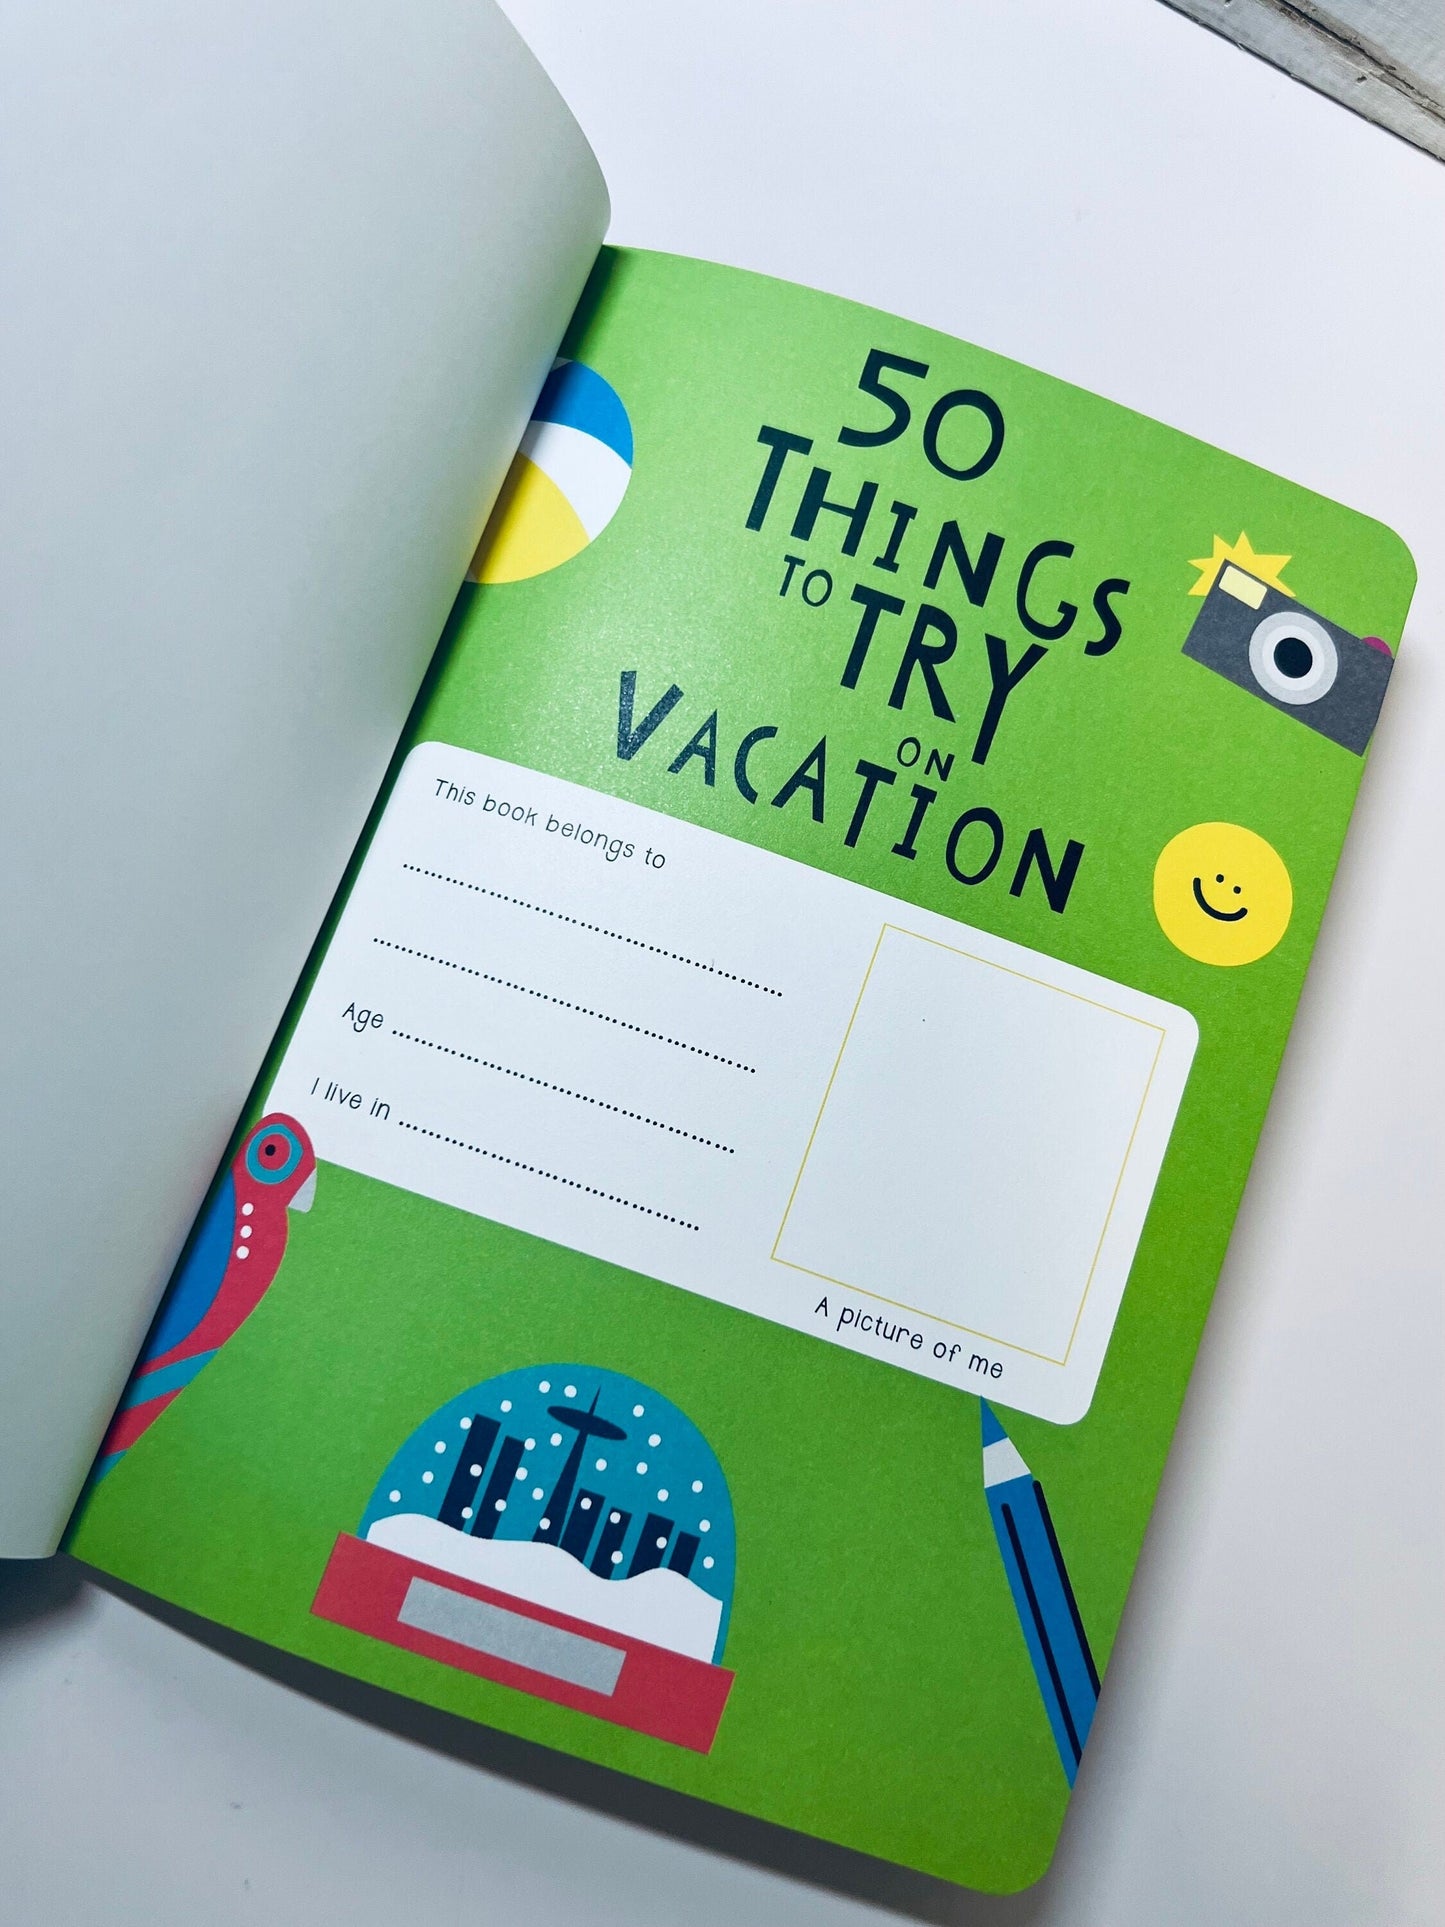 Adventure Journal for Kids Vacation Journal-50 Things to Try on Vacation Book-Speech Therapy Book-Writing Book for Kids